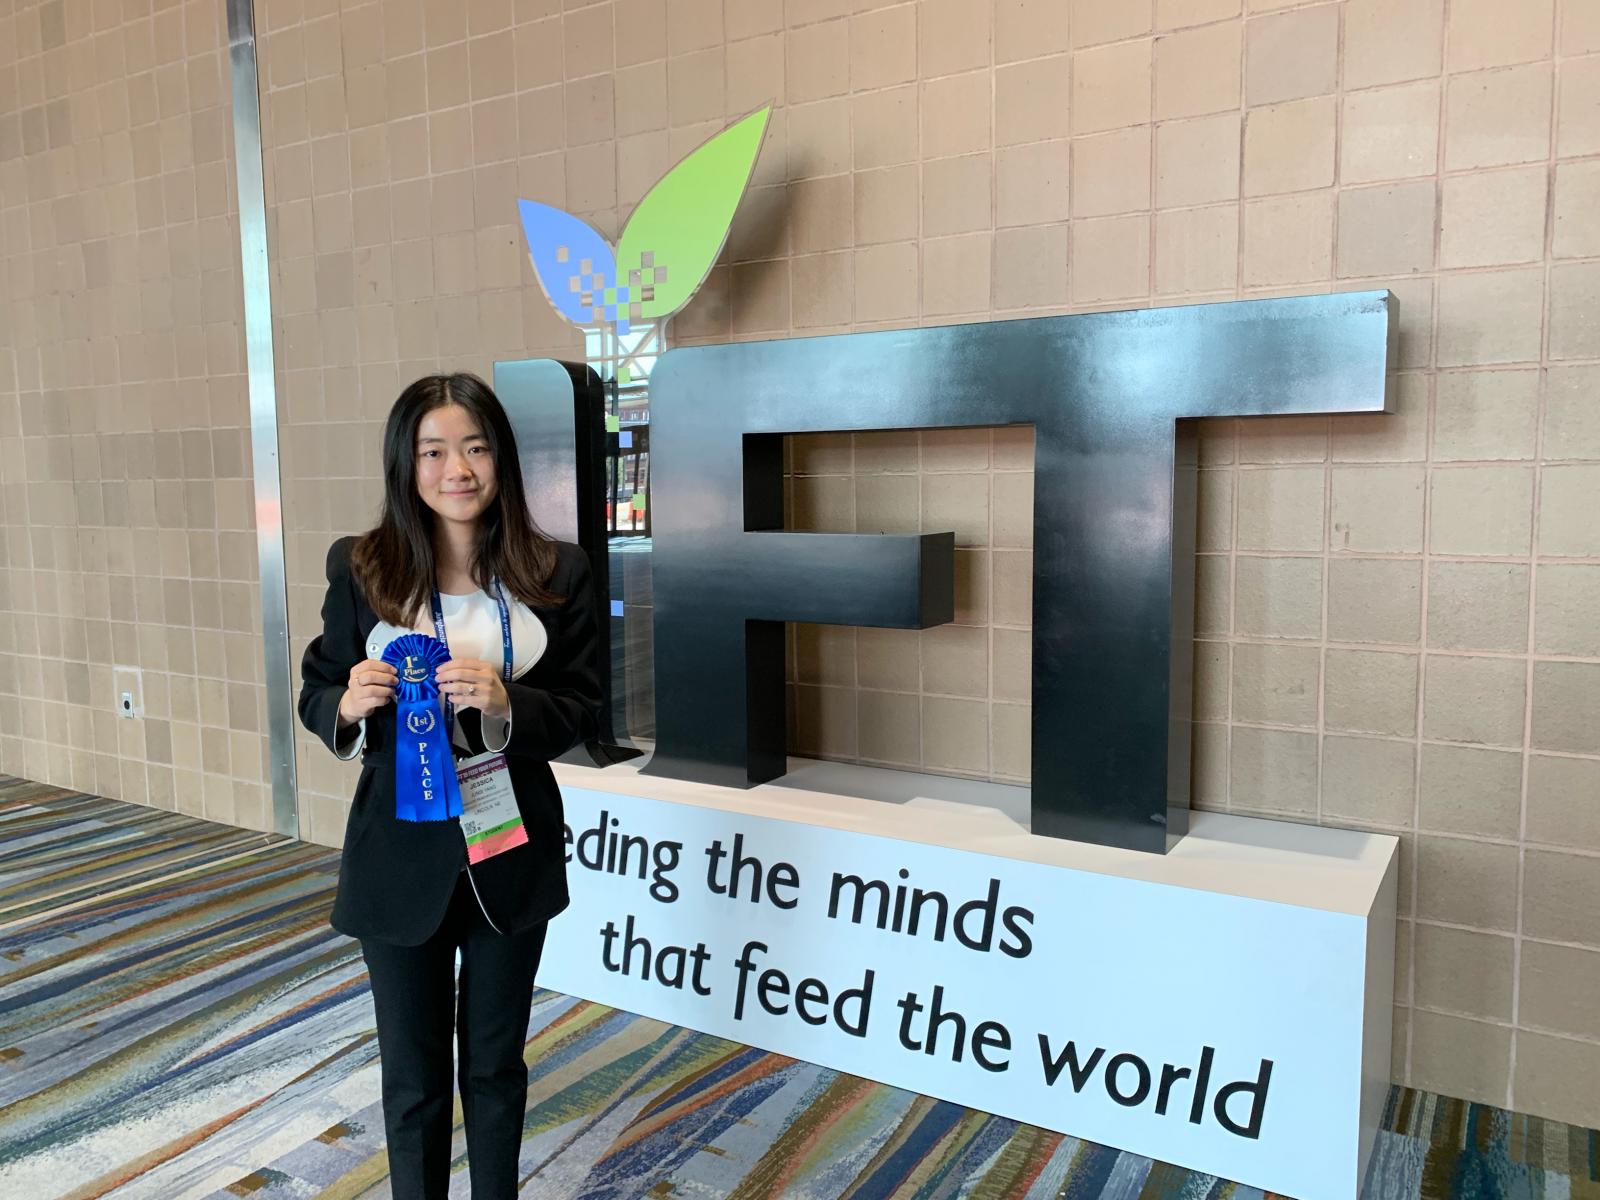 Jessica holding her first place ribbon at IFT19 Annual Meeting & Food Expo in New Orleans, LA